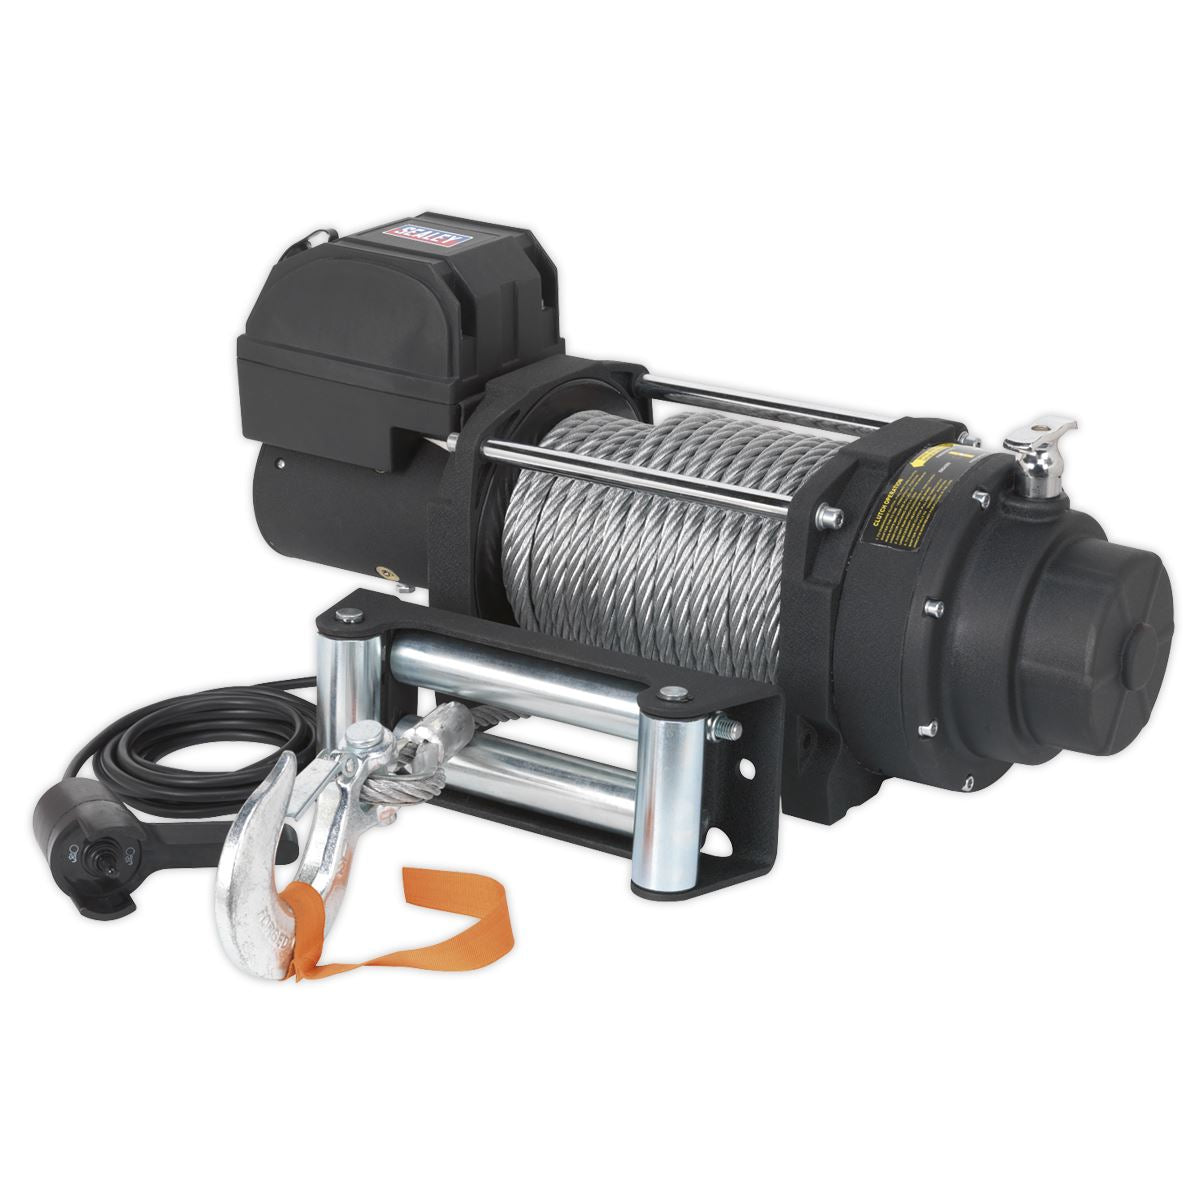 Sealey Premier Recovery Winch 8180kg(18000lb)Line Pull 12V Industrial